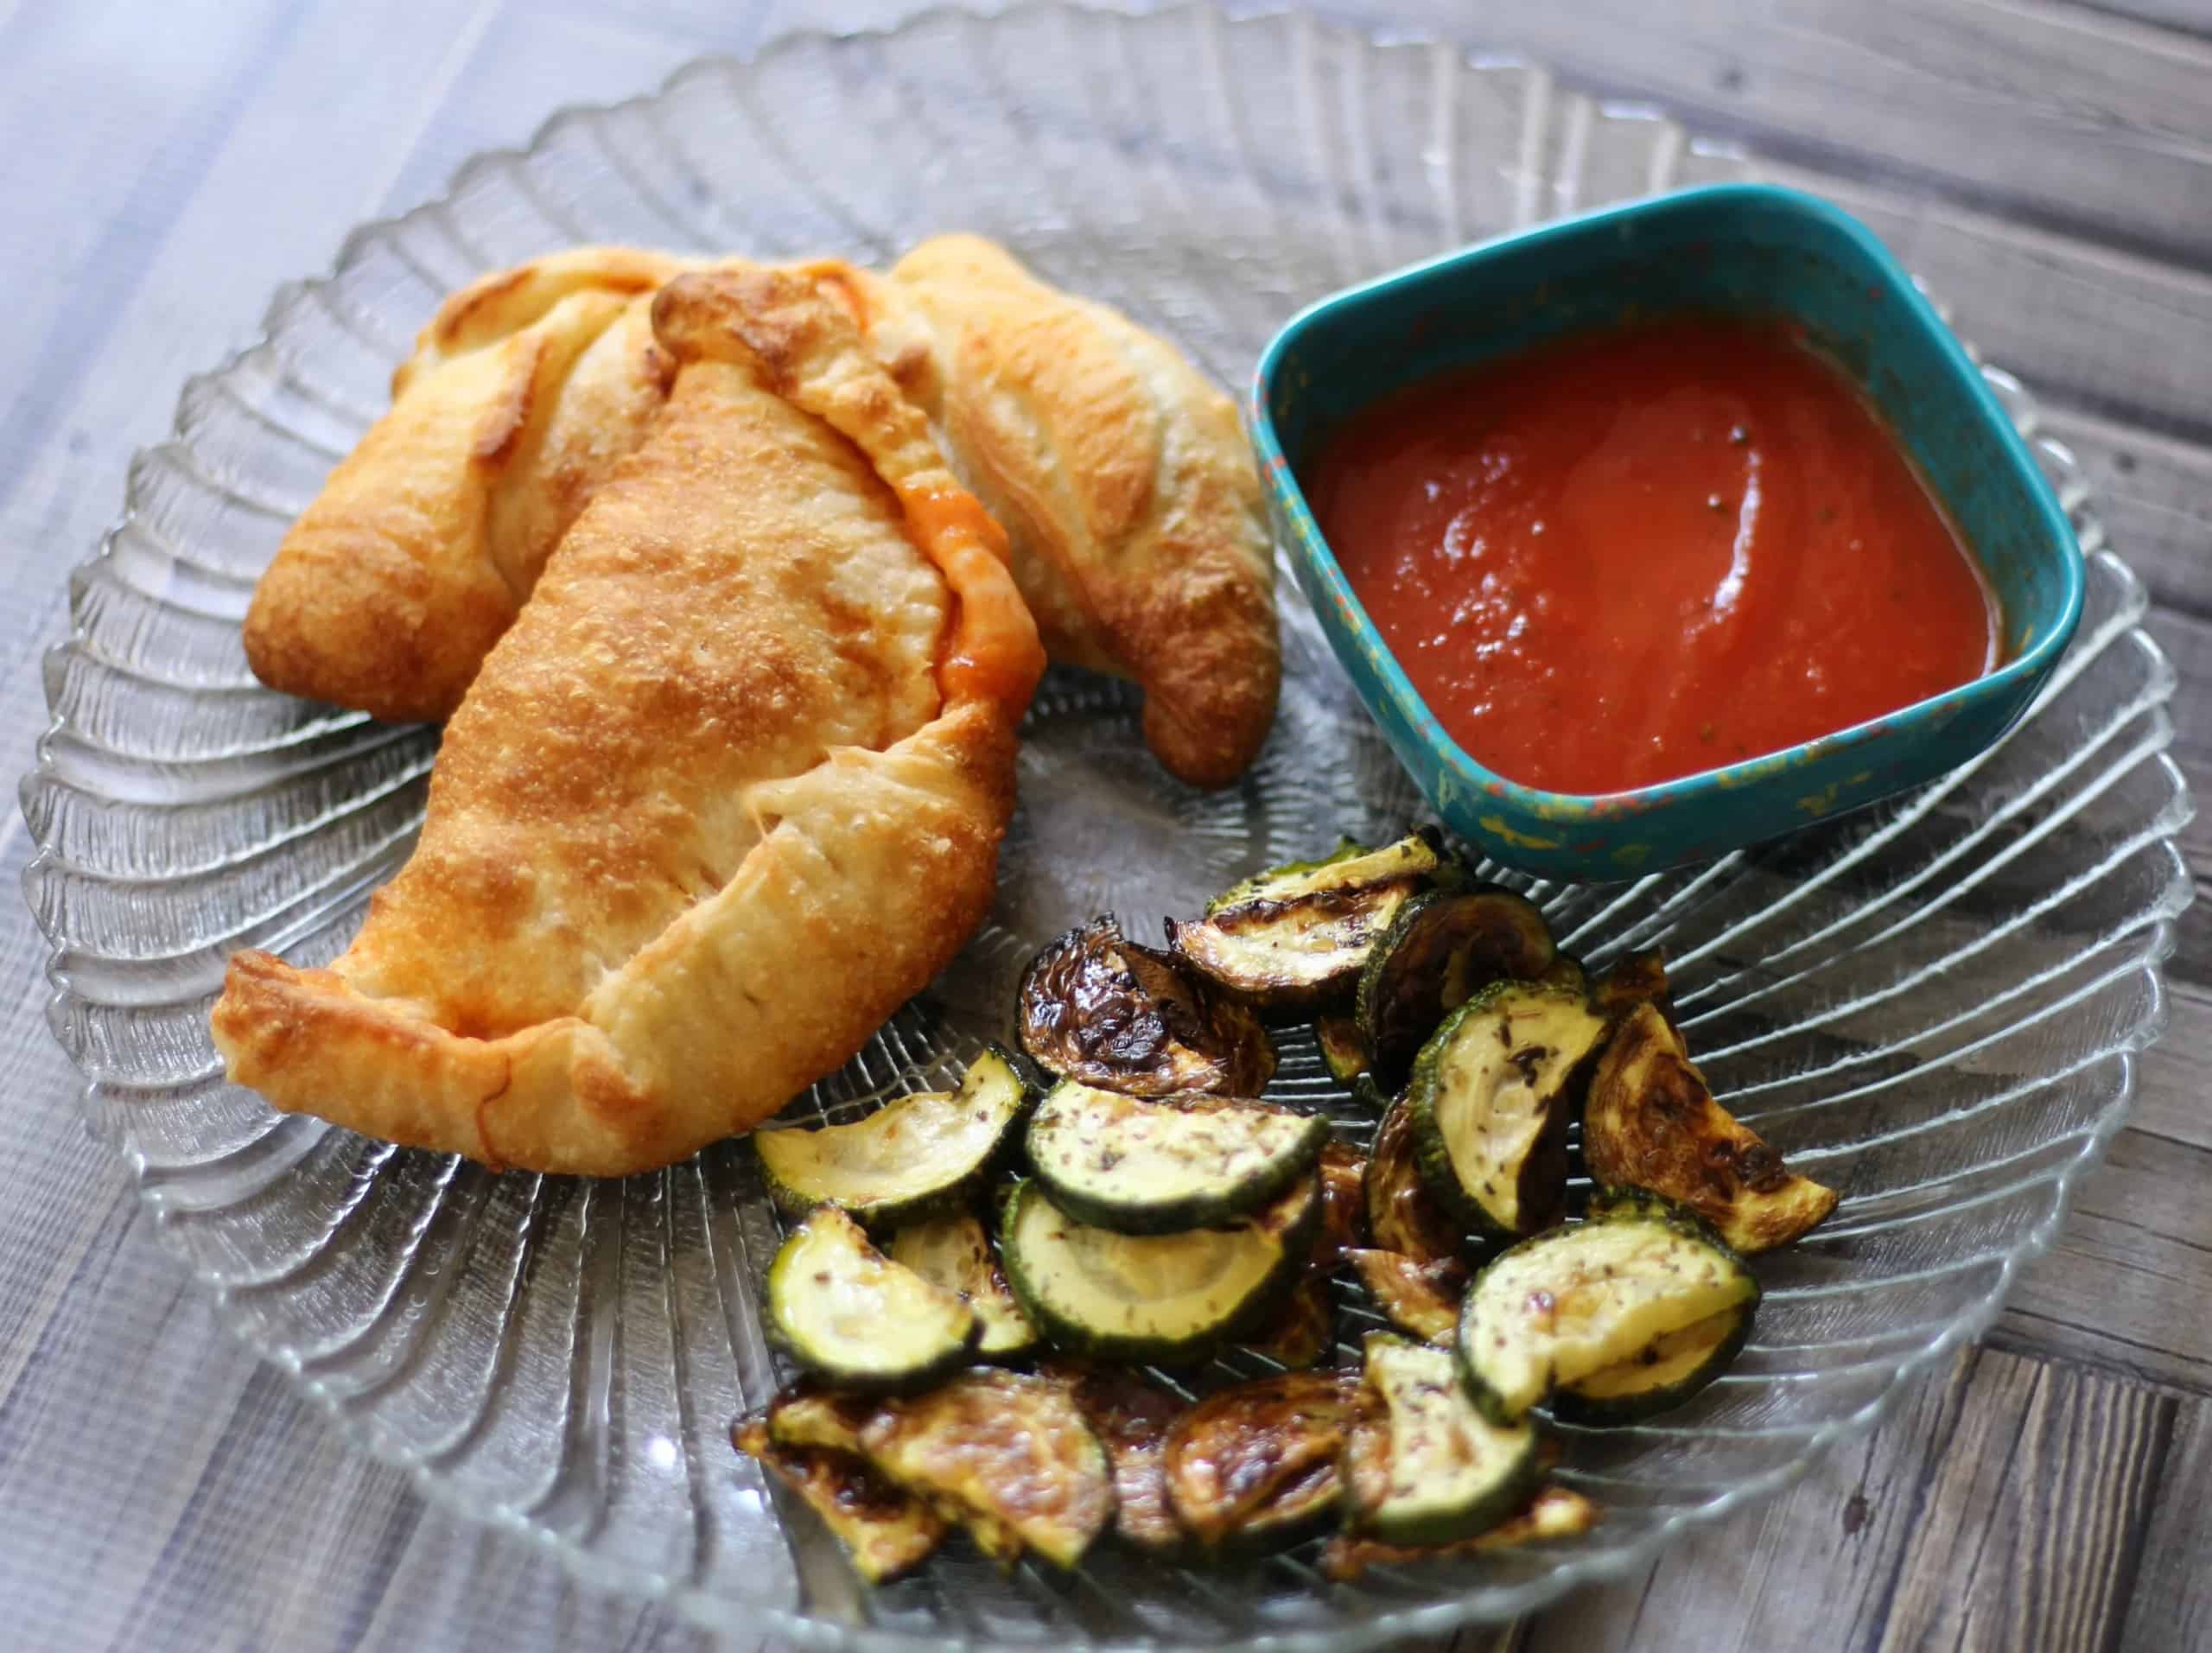 Glass plate with a calzone, marinara in a bowl, and zucchini.